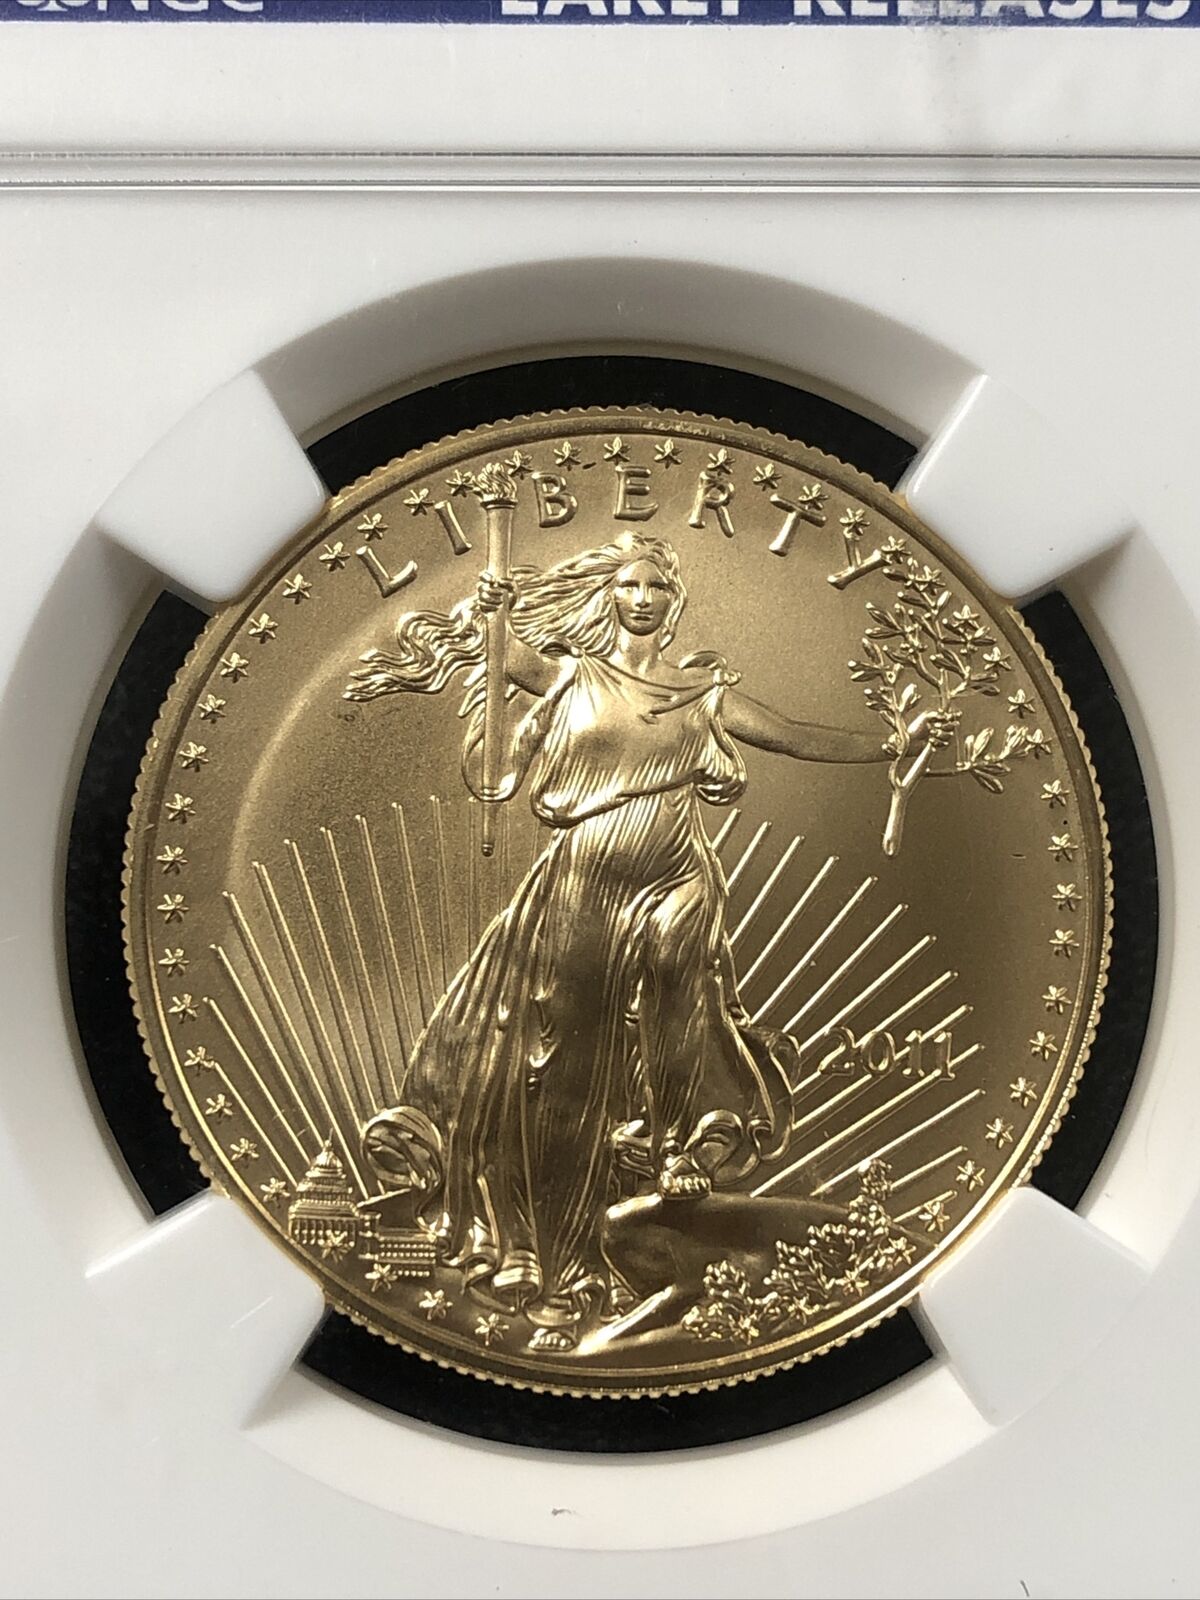 Compare 1 oz Gold Eagle Coin - NGC MS-69 - Random Date dealer prices